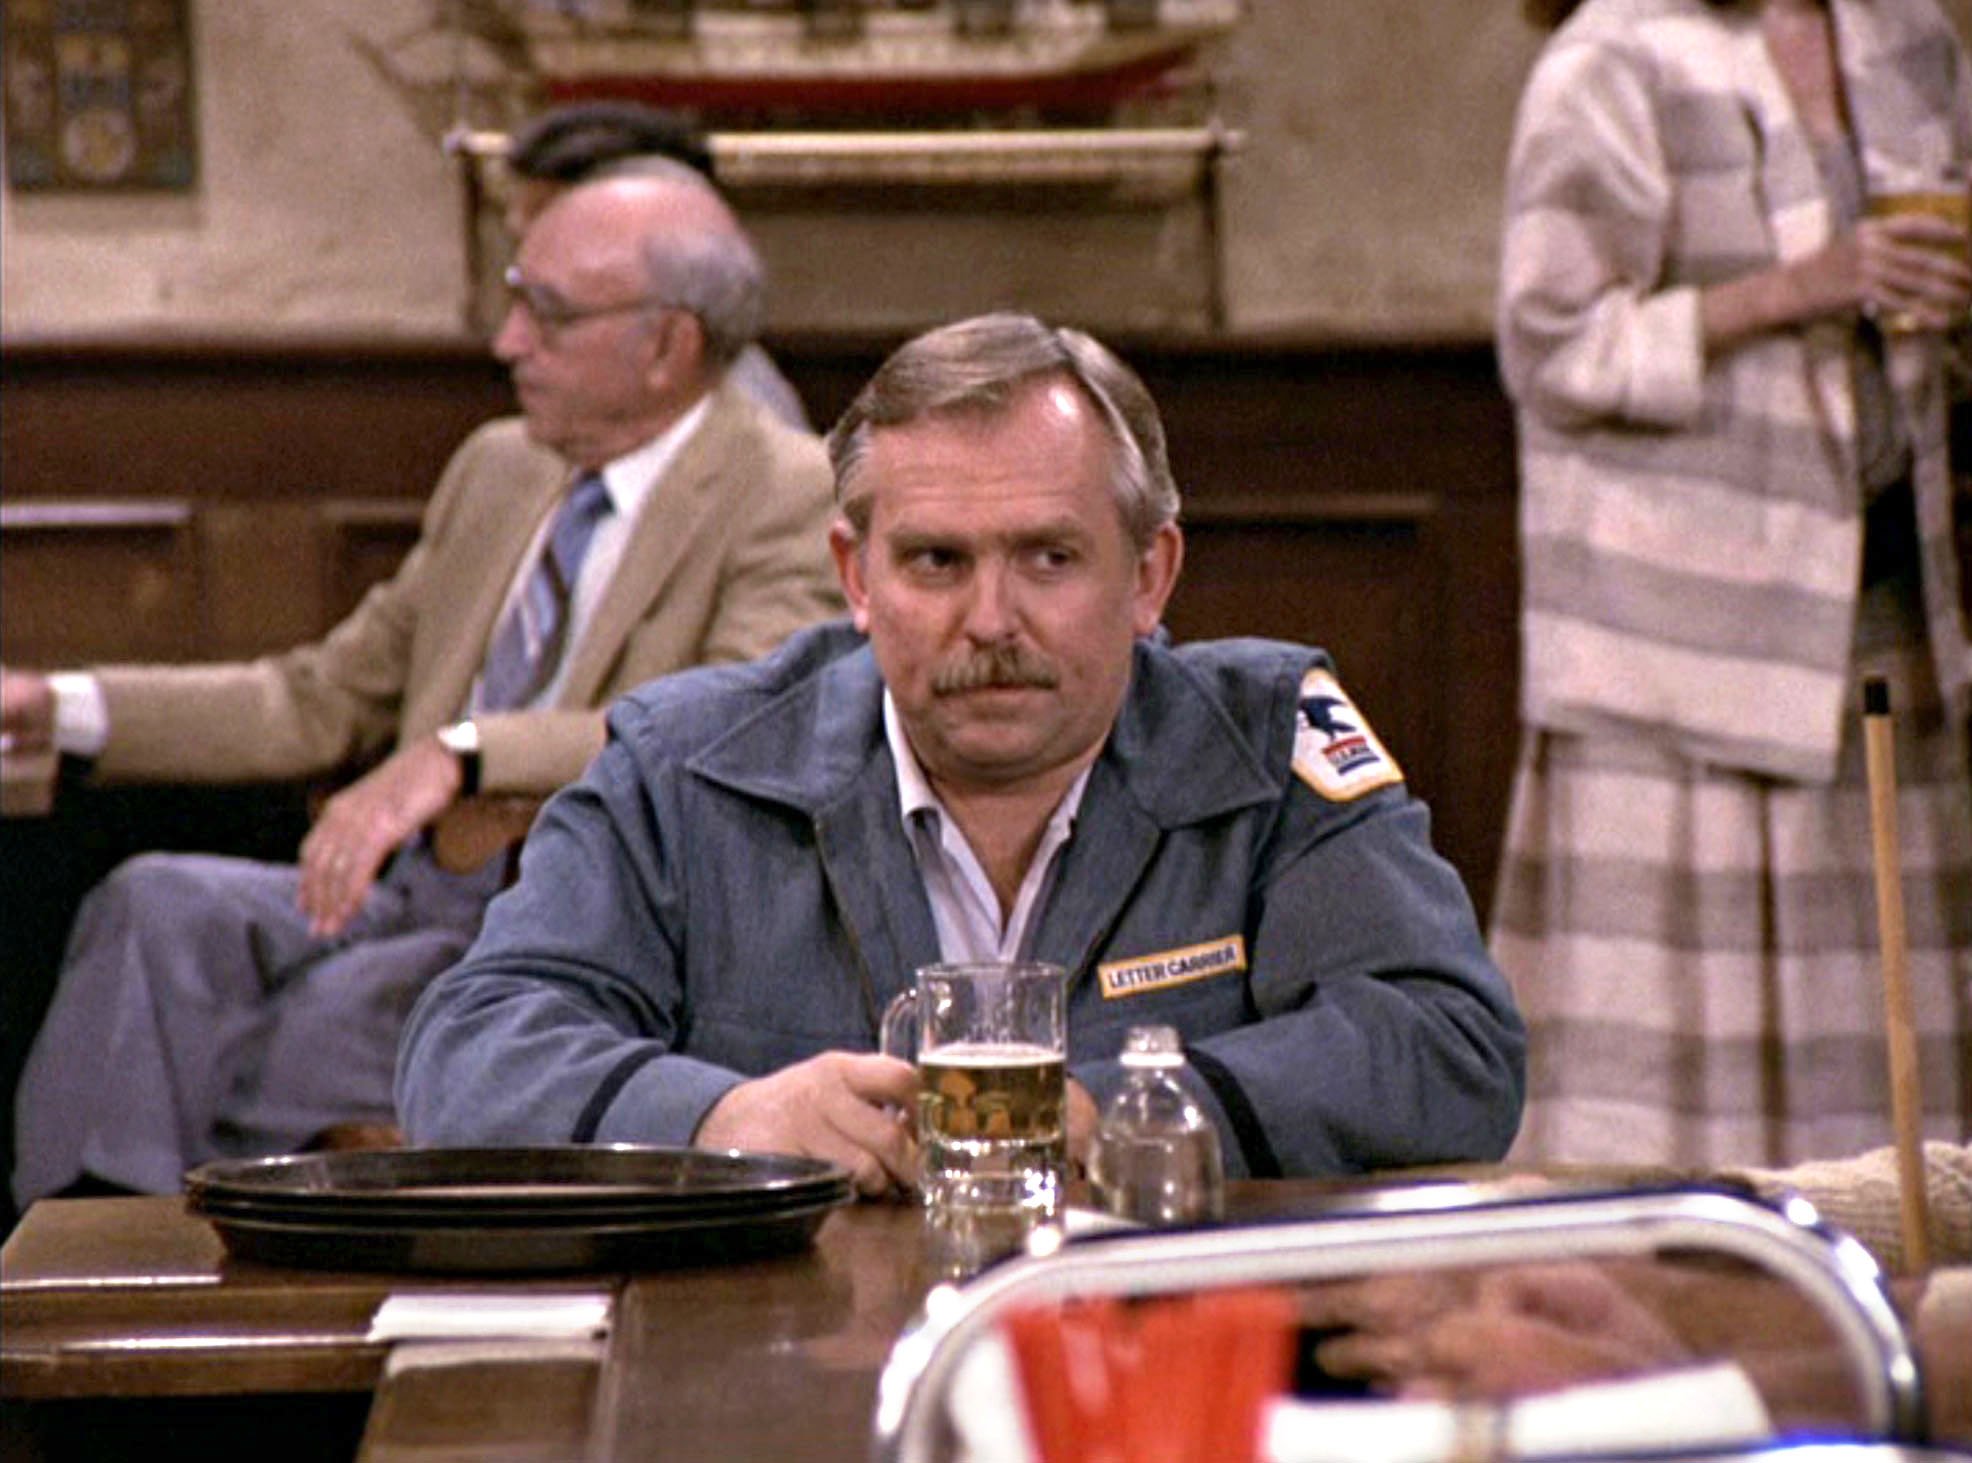 'Cheers': Cliff Clavin (John Ratzenberger) sits at the bar drinking a beer